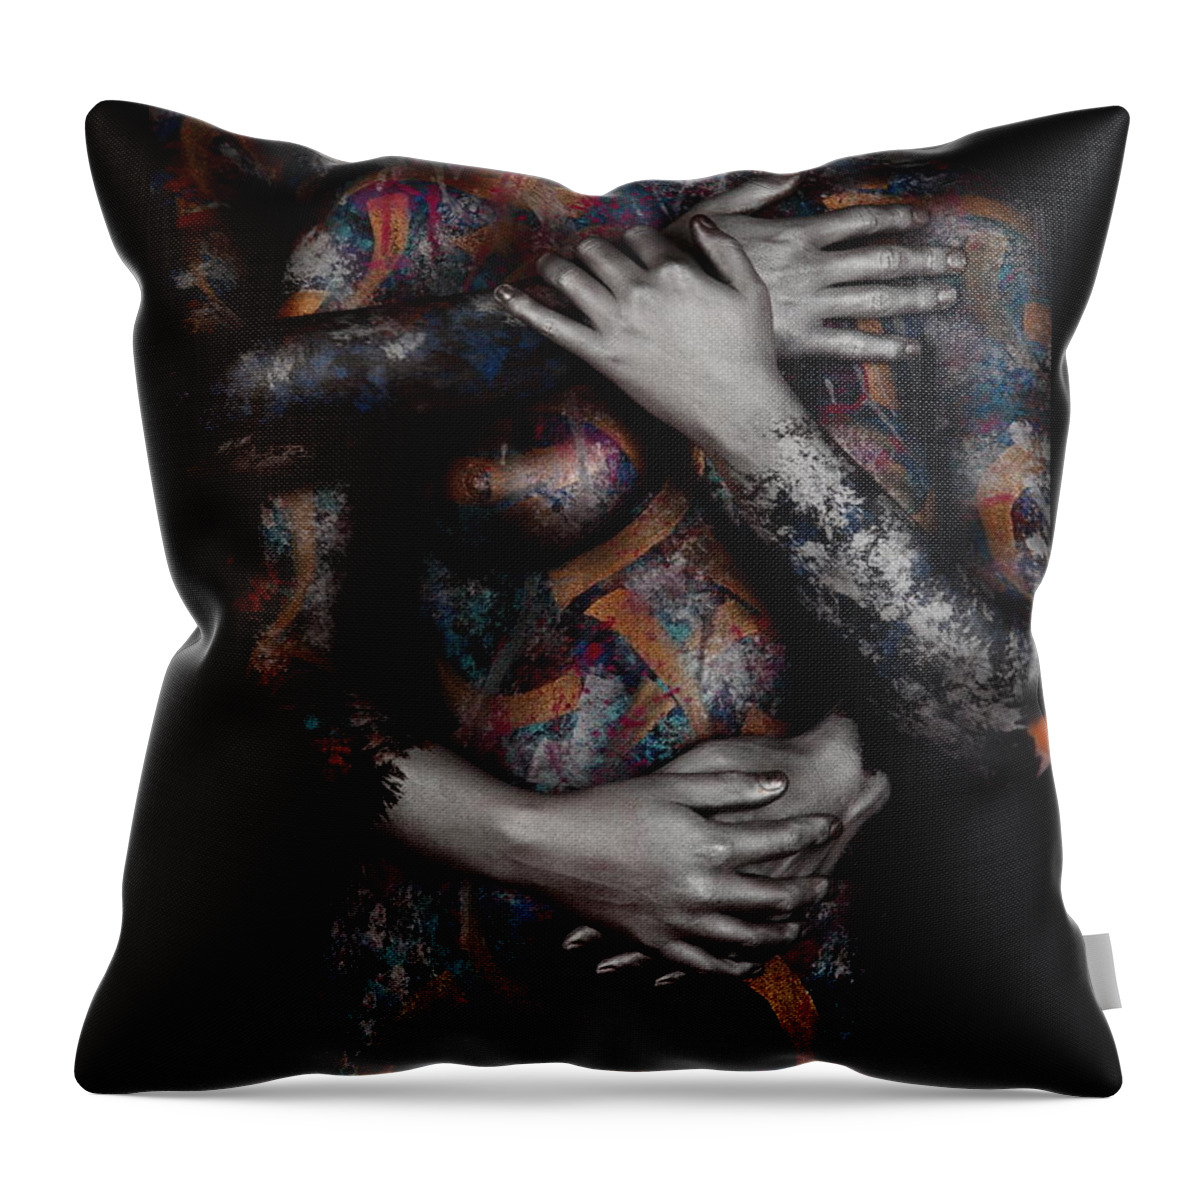 Angela Rene' Roberts Throw Pillow featuring the photograph Sensual Embrace by Cully Firmin